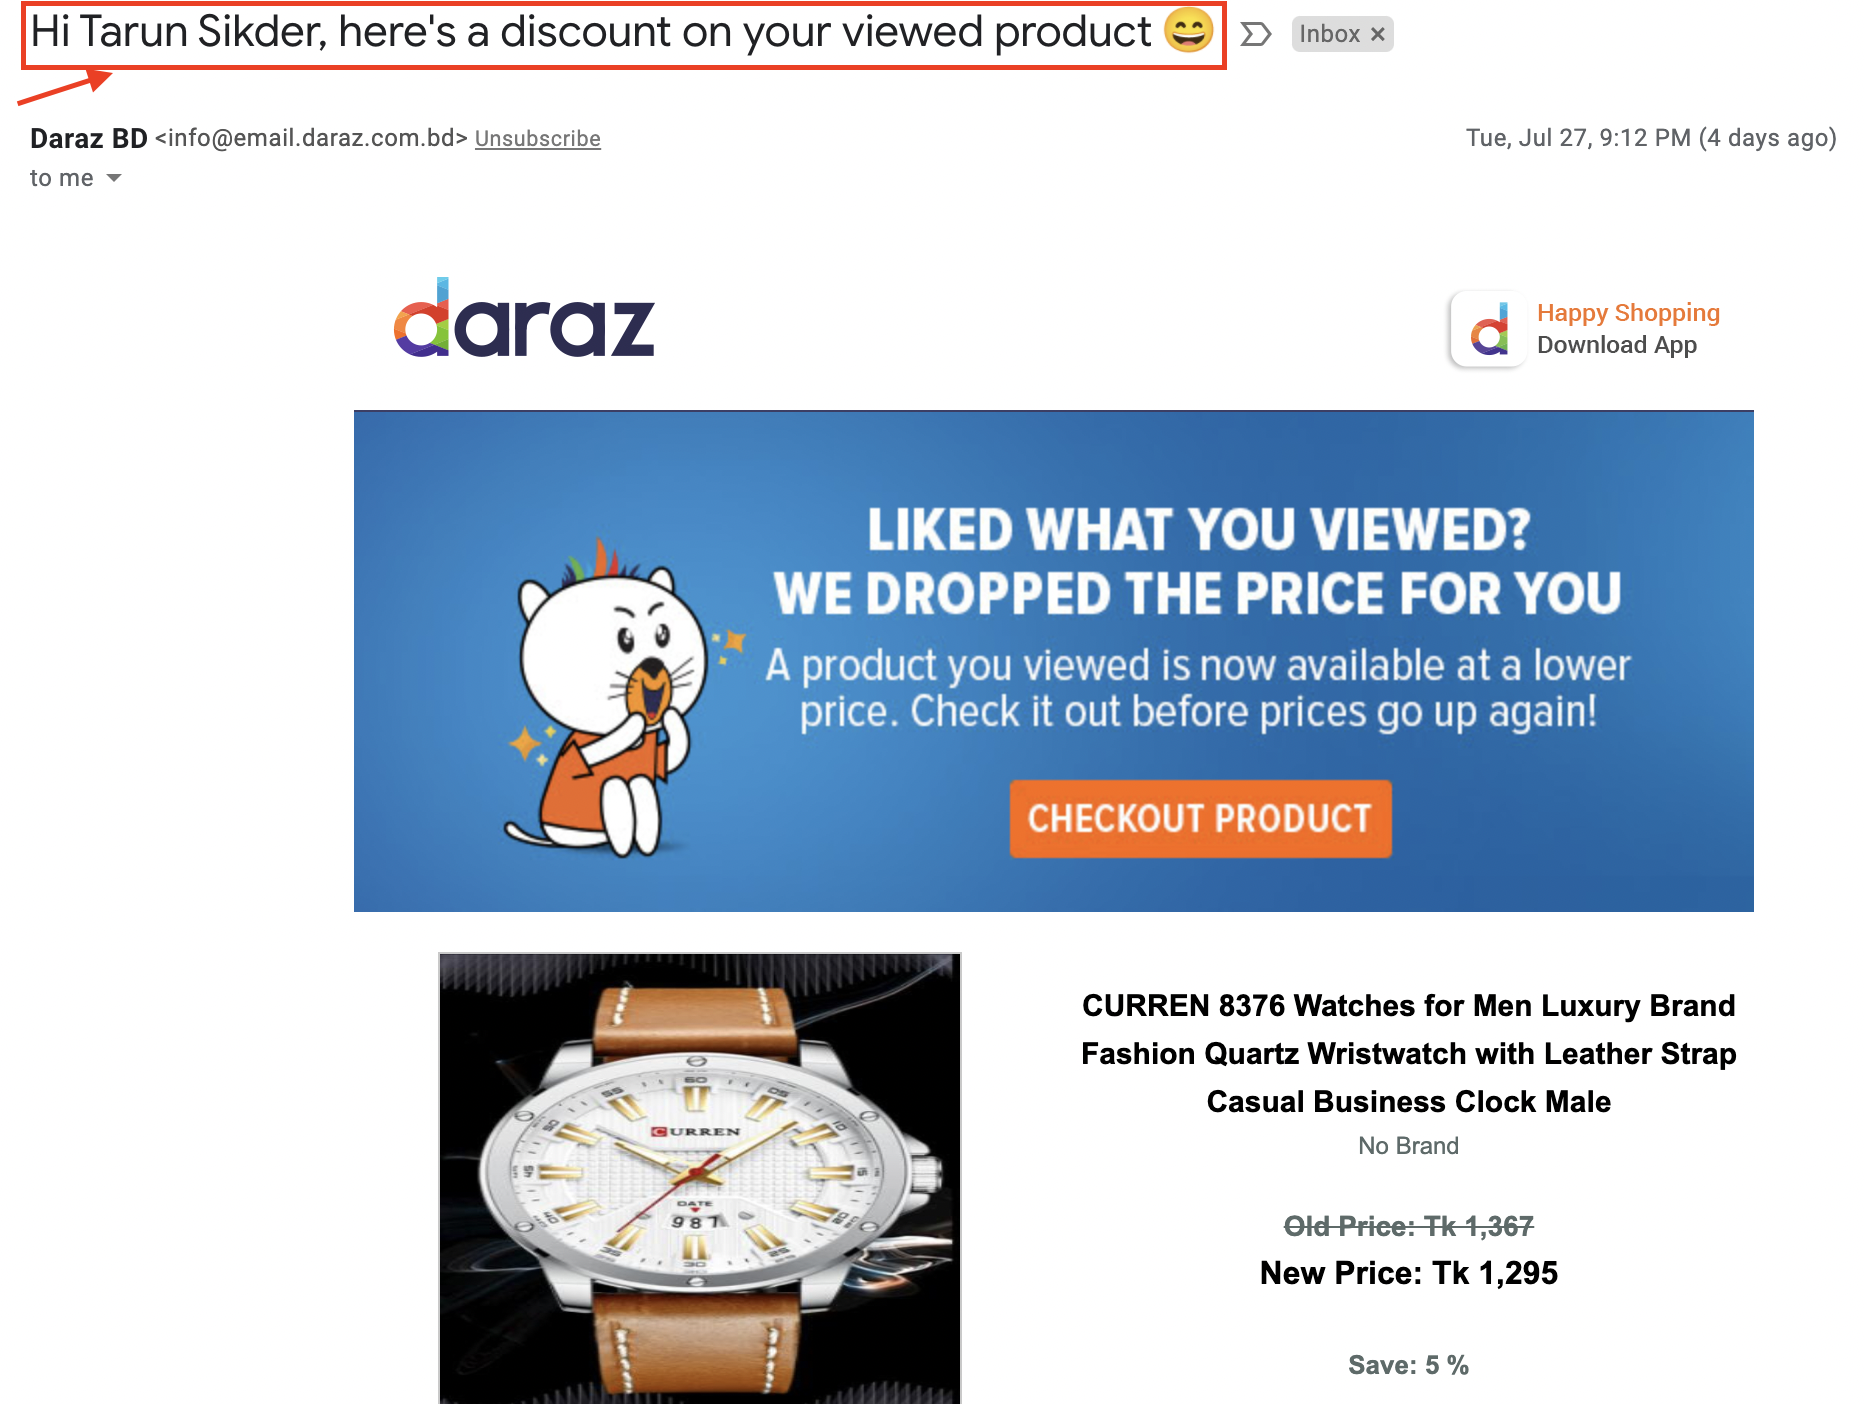 ecommerce personalized email